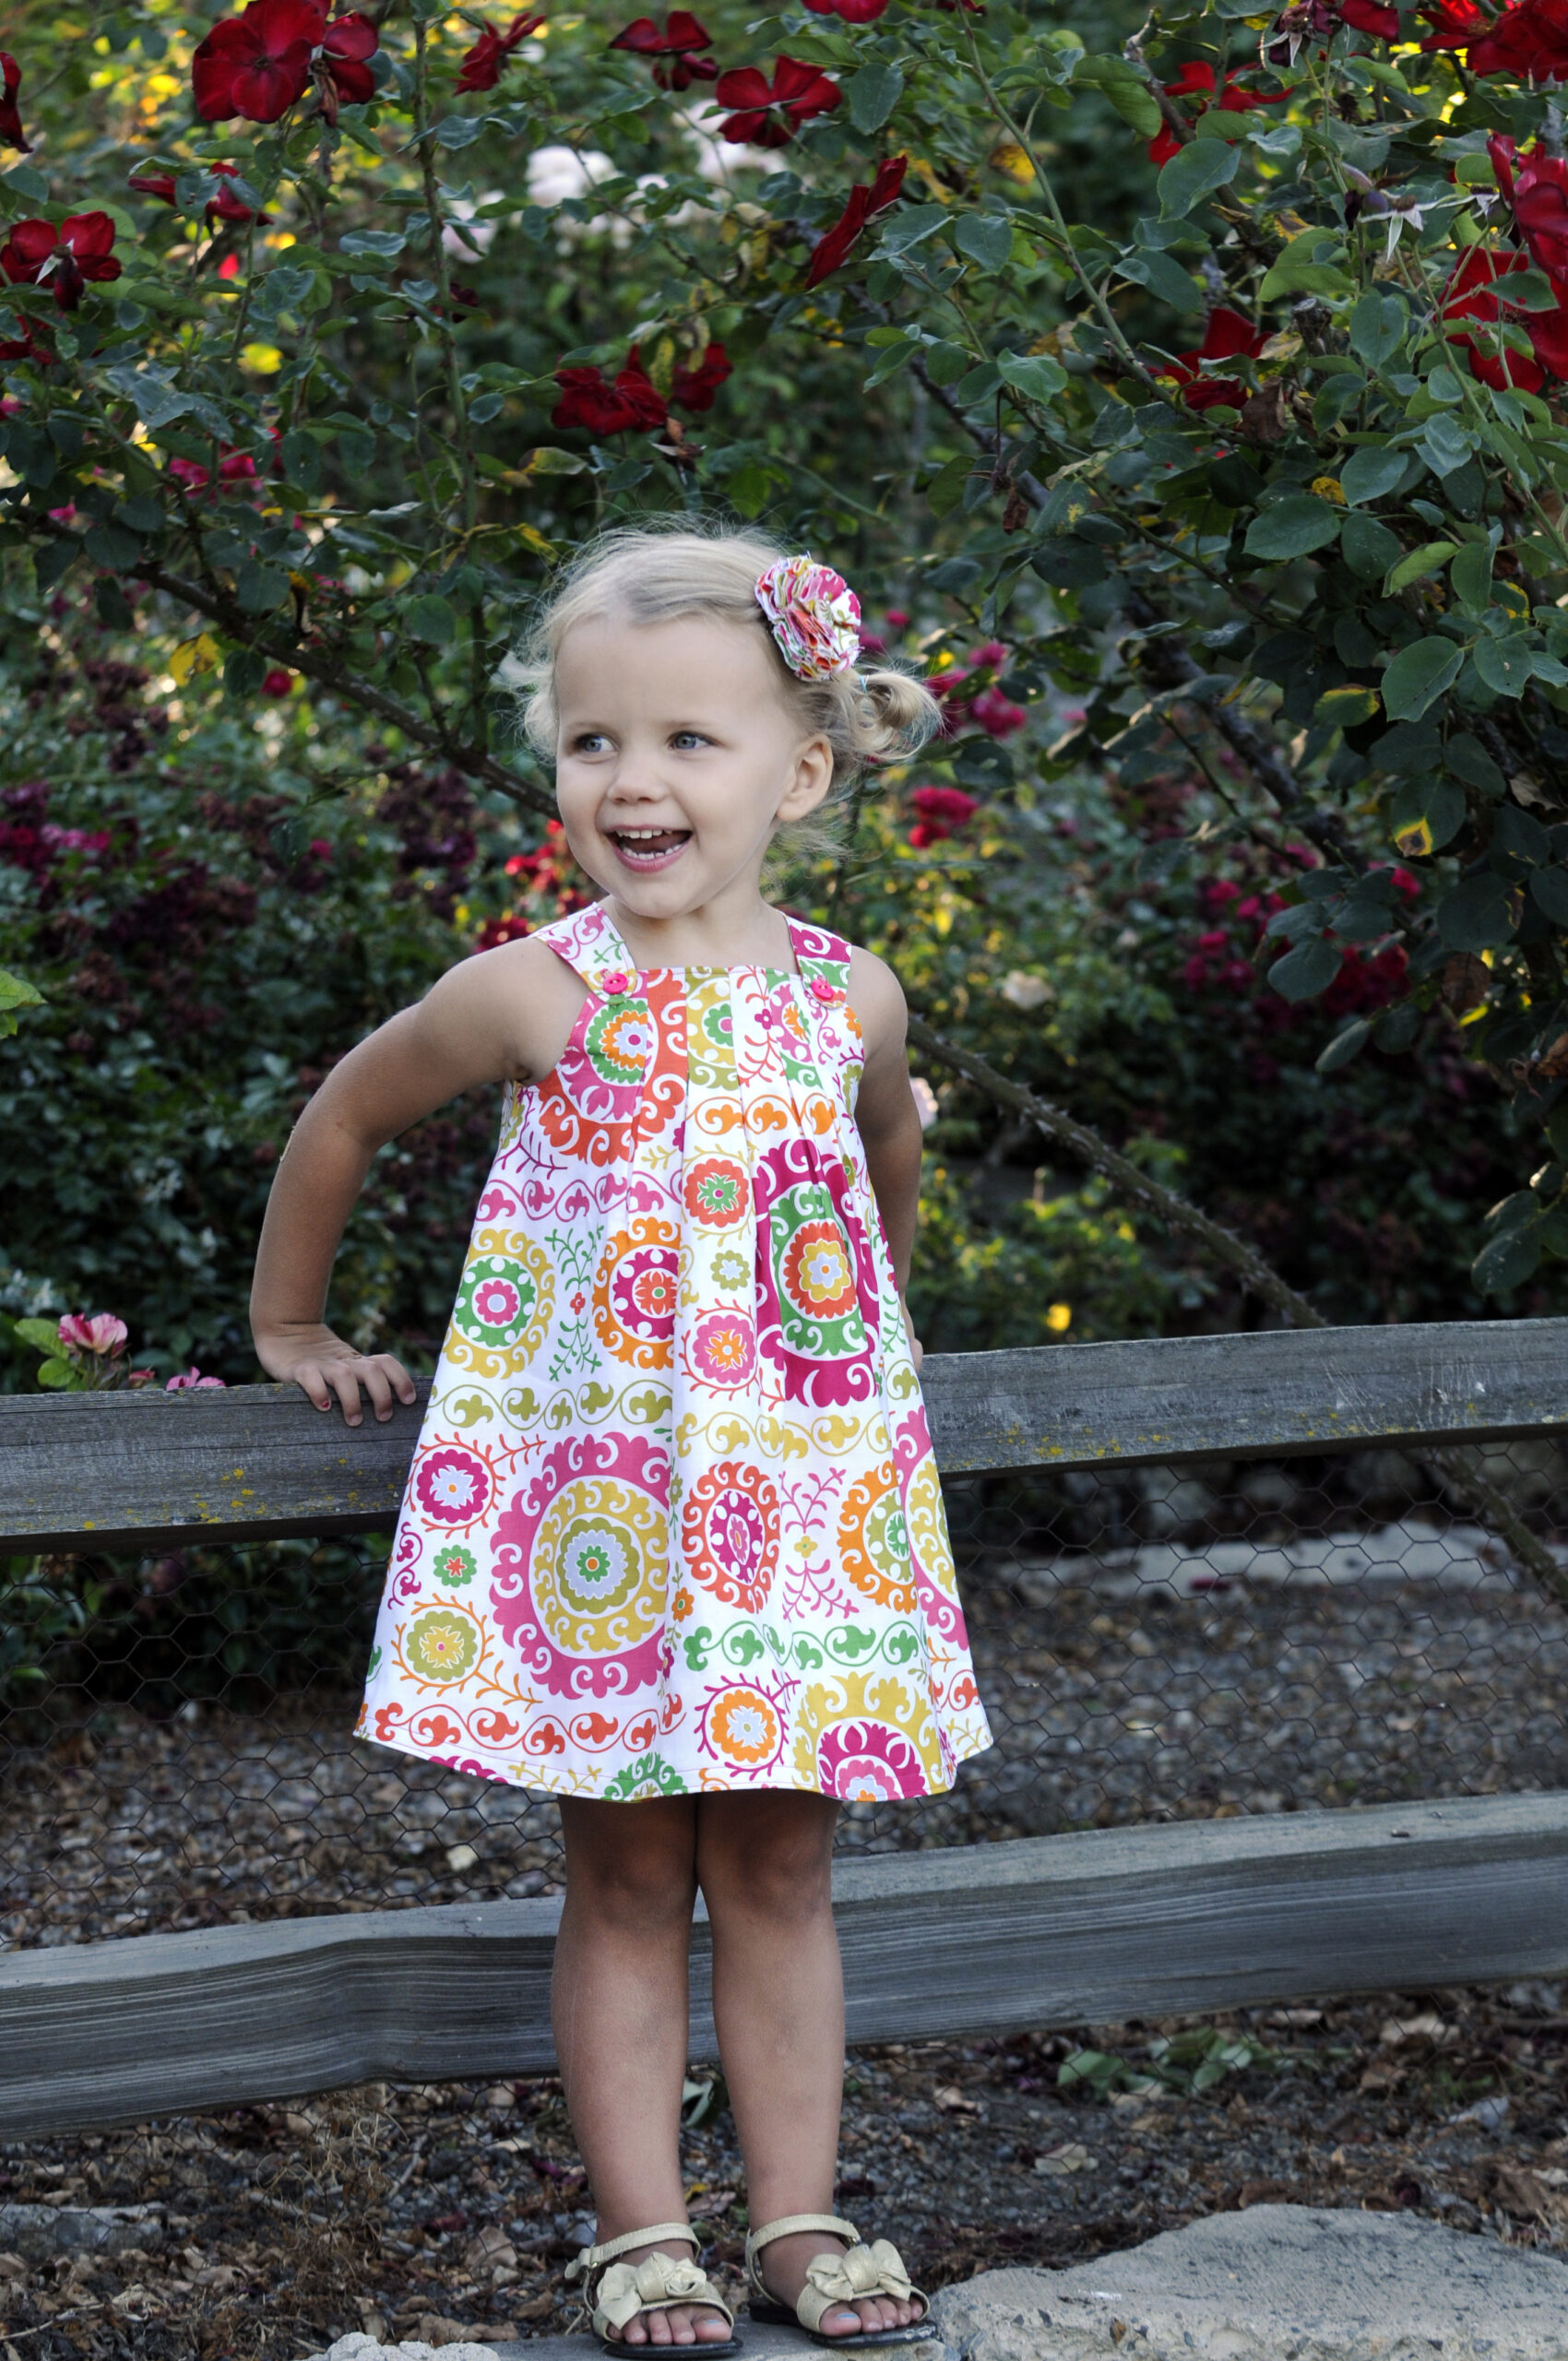 The Harper Dress from Sew Sweet Patterns